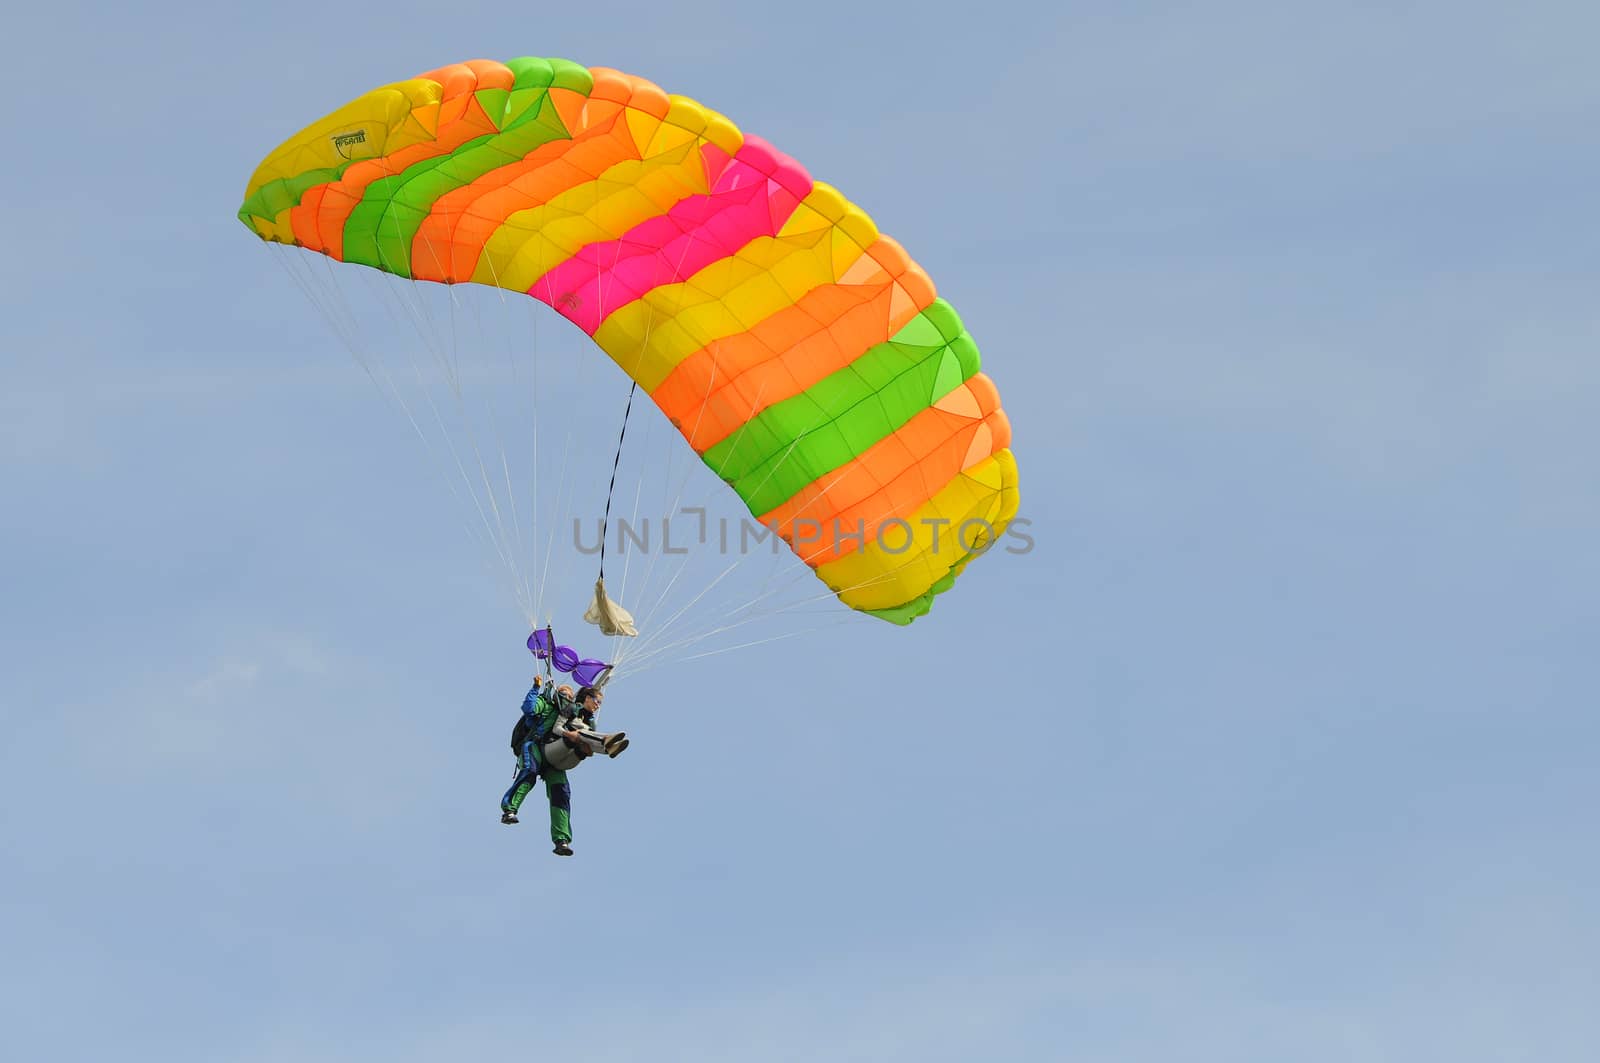 the parachutist goes down on a multi-colored parachute. by veronka72